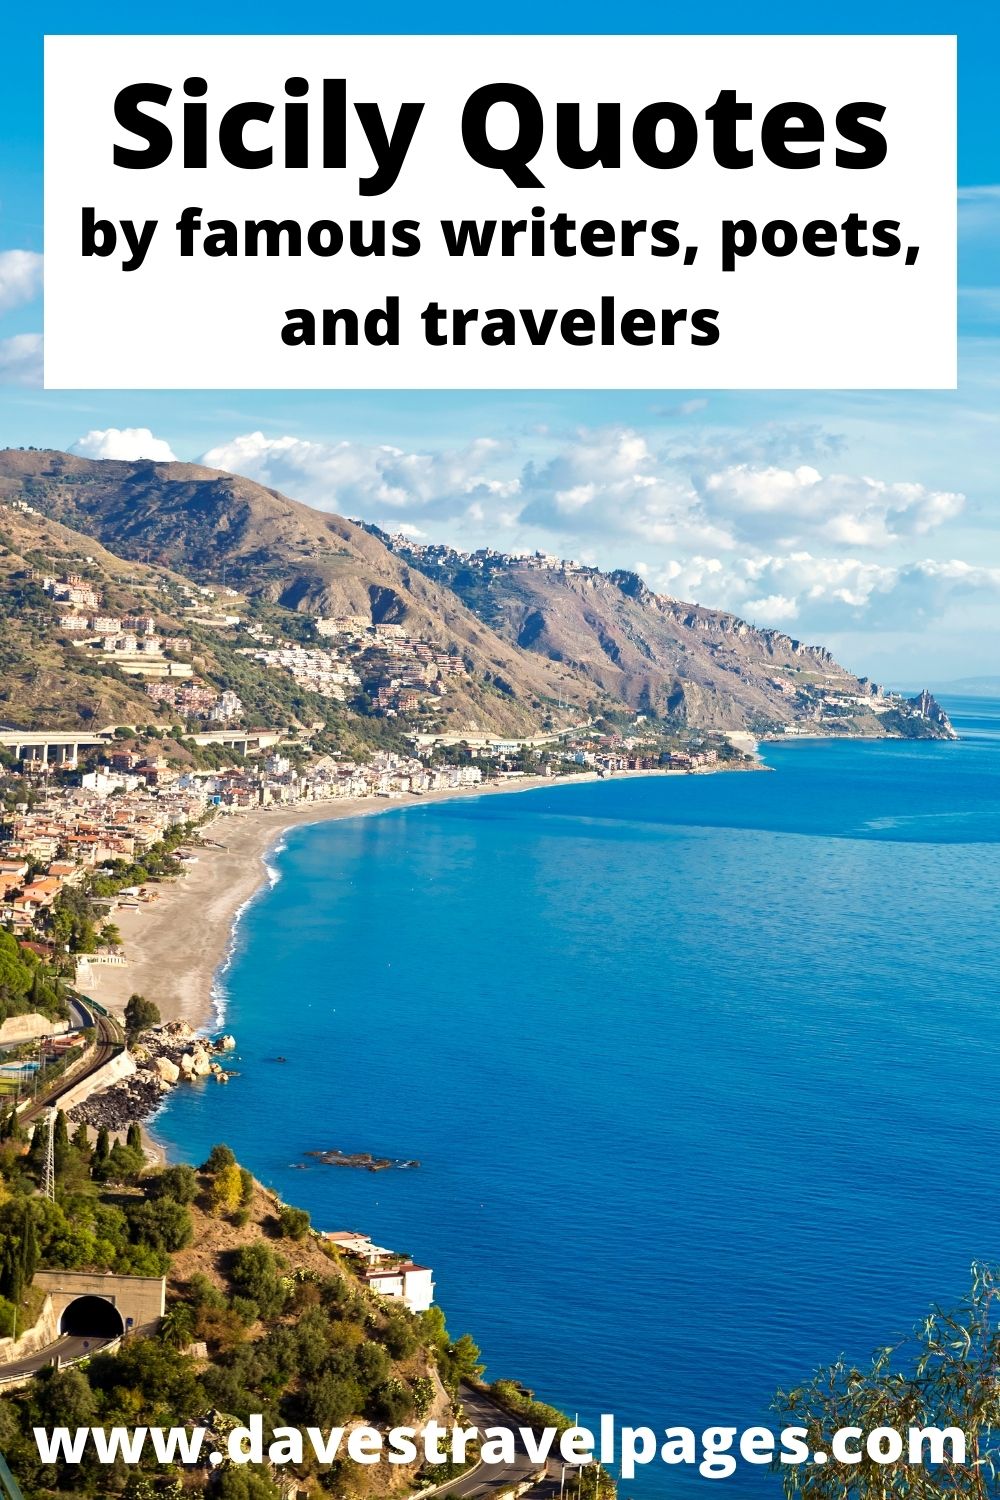 Sicily Quotes by famous writers, poets, and travelers